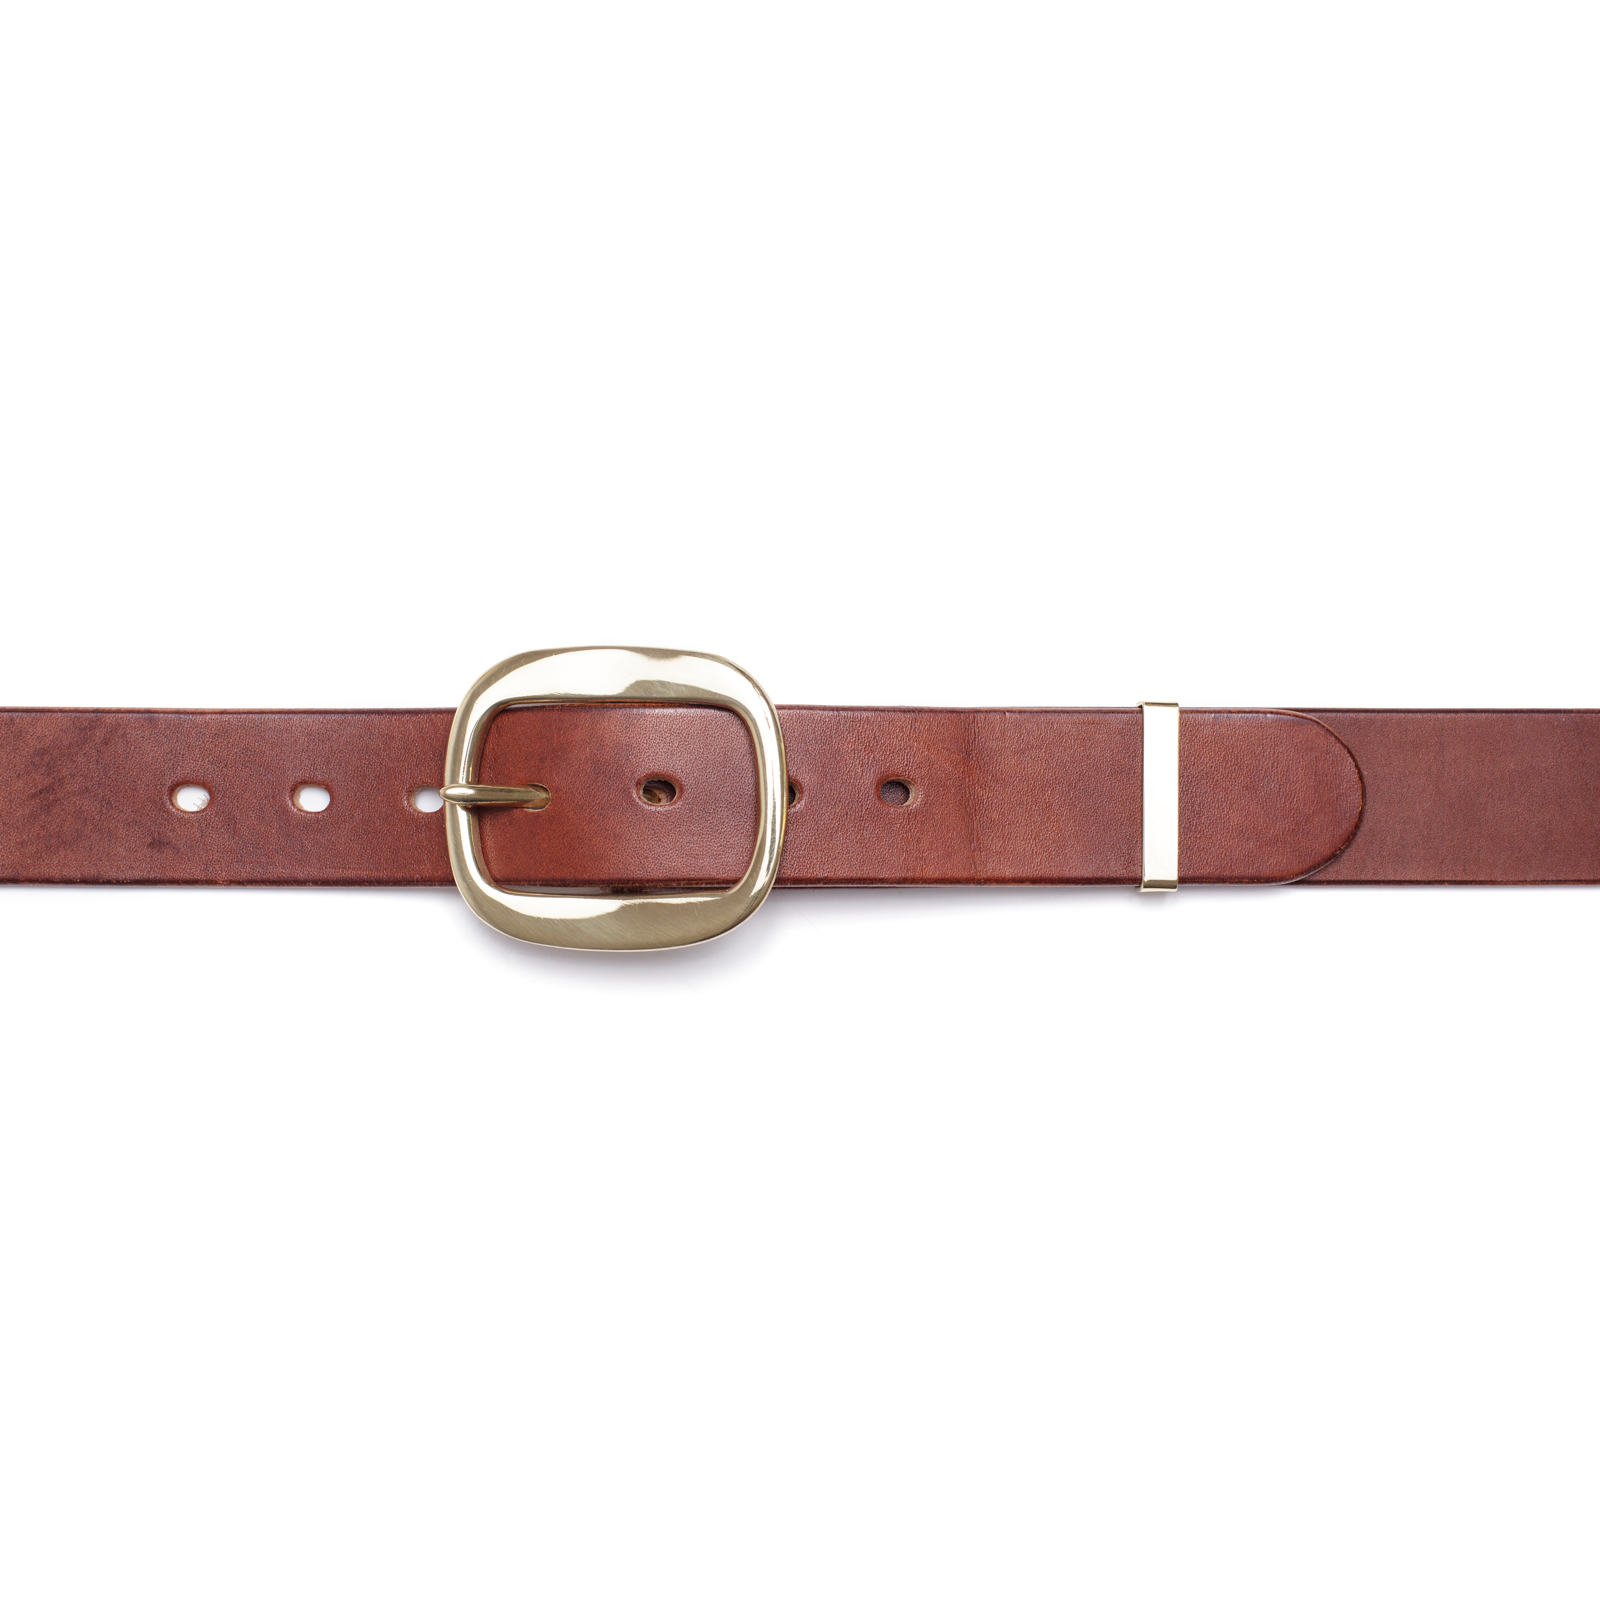 Hand crafted hand stitched dark stain dark brown english bridle leather belt with solid brass swagehead english buckle, luxury goods heirloom